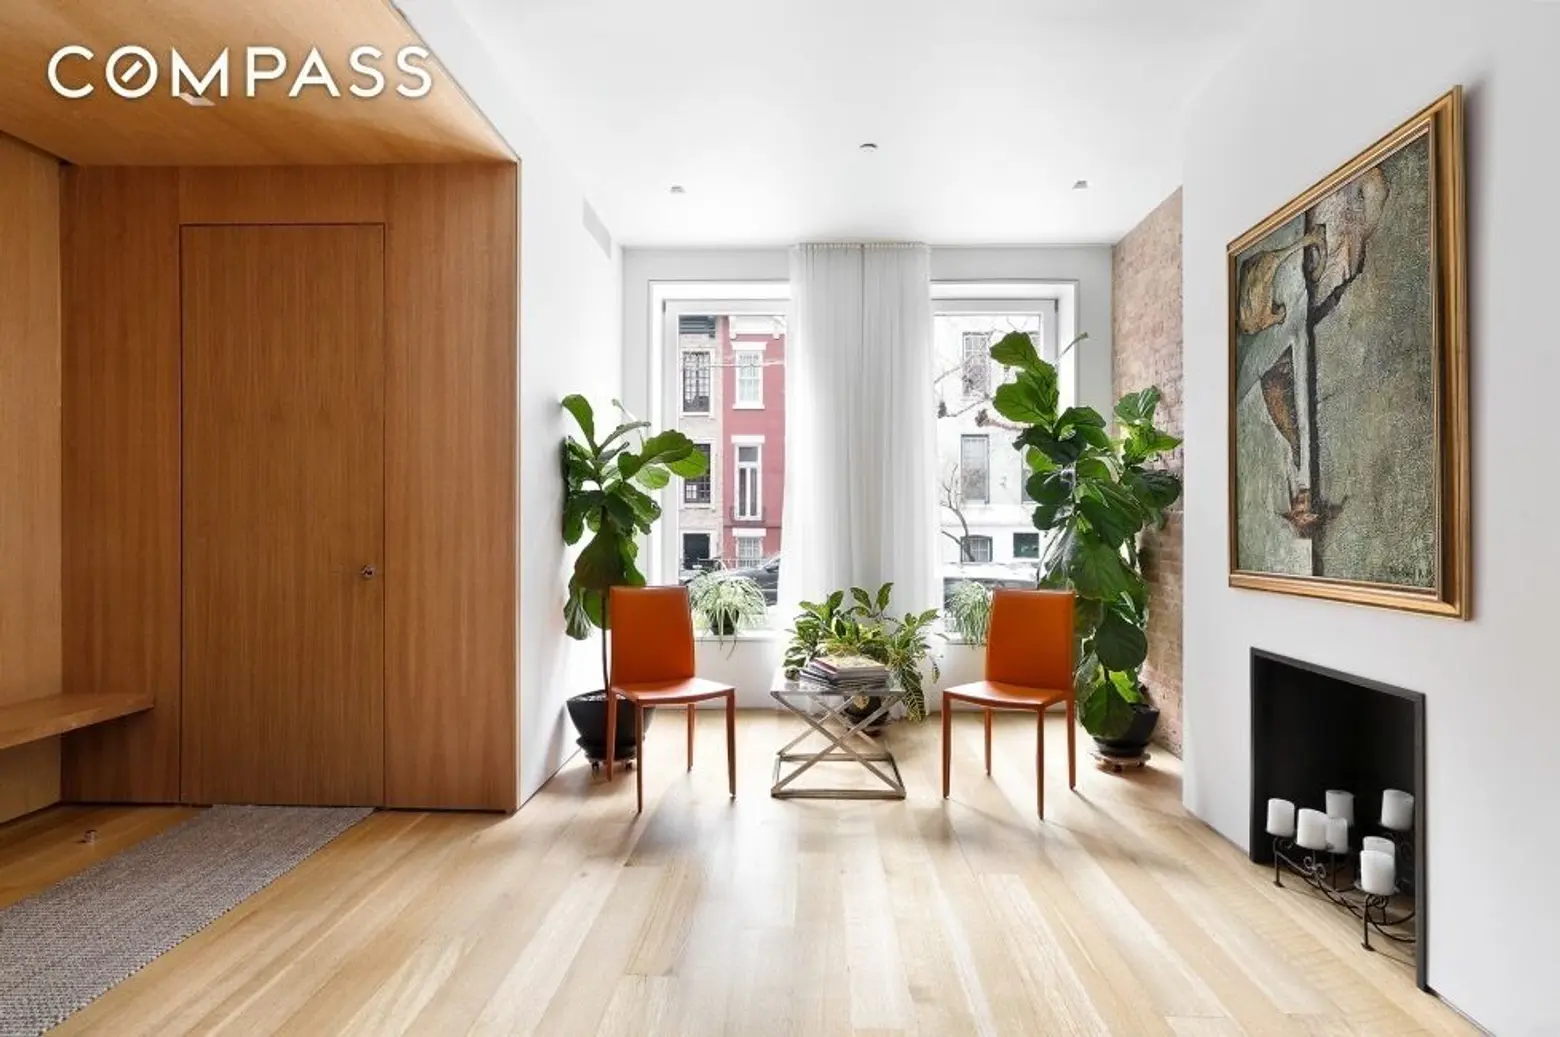 $10M Upper East Side townhouse is introducing its neighbors to the future